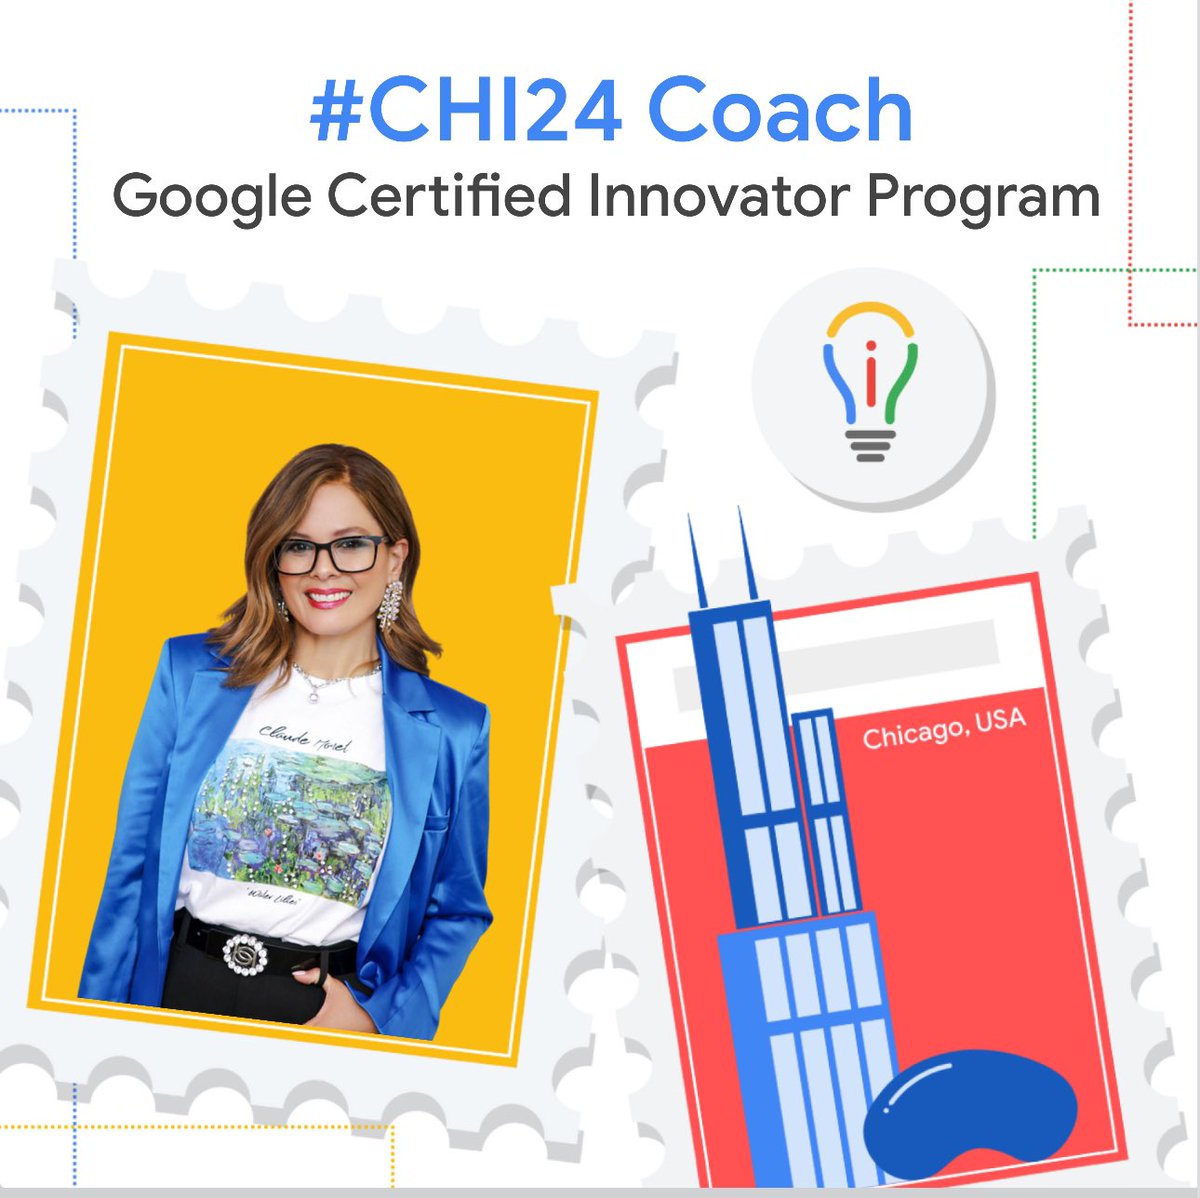 I'm joining the new cohort #CHI24 as a coach! 🤩 Can't contain my excitement! #VIA20 was mind-blowing online, imagine how INCREDIBLE it's going to be in person! 🎉 So many great minds and innovative ideas, can't wait to be a part of it! #excited #GoogleEI @GoogleForEdu